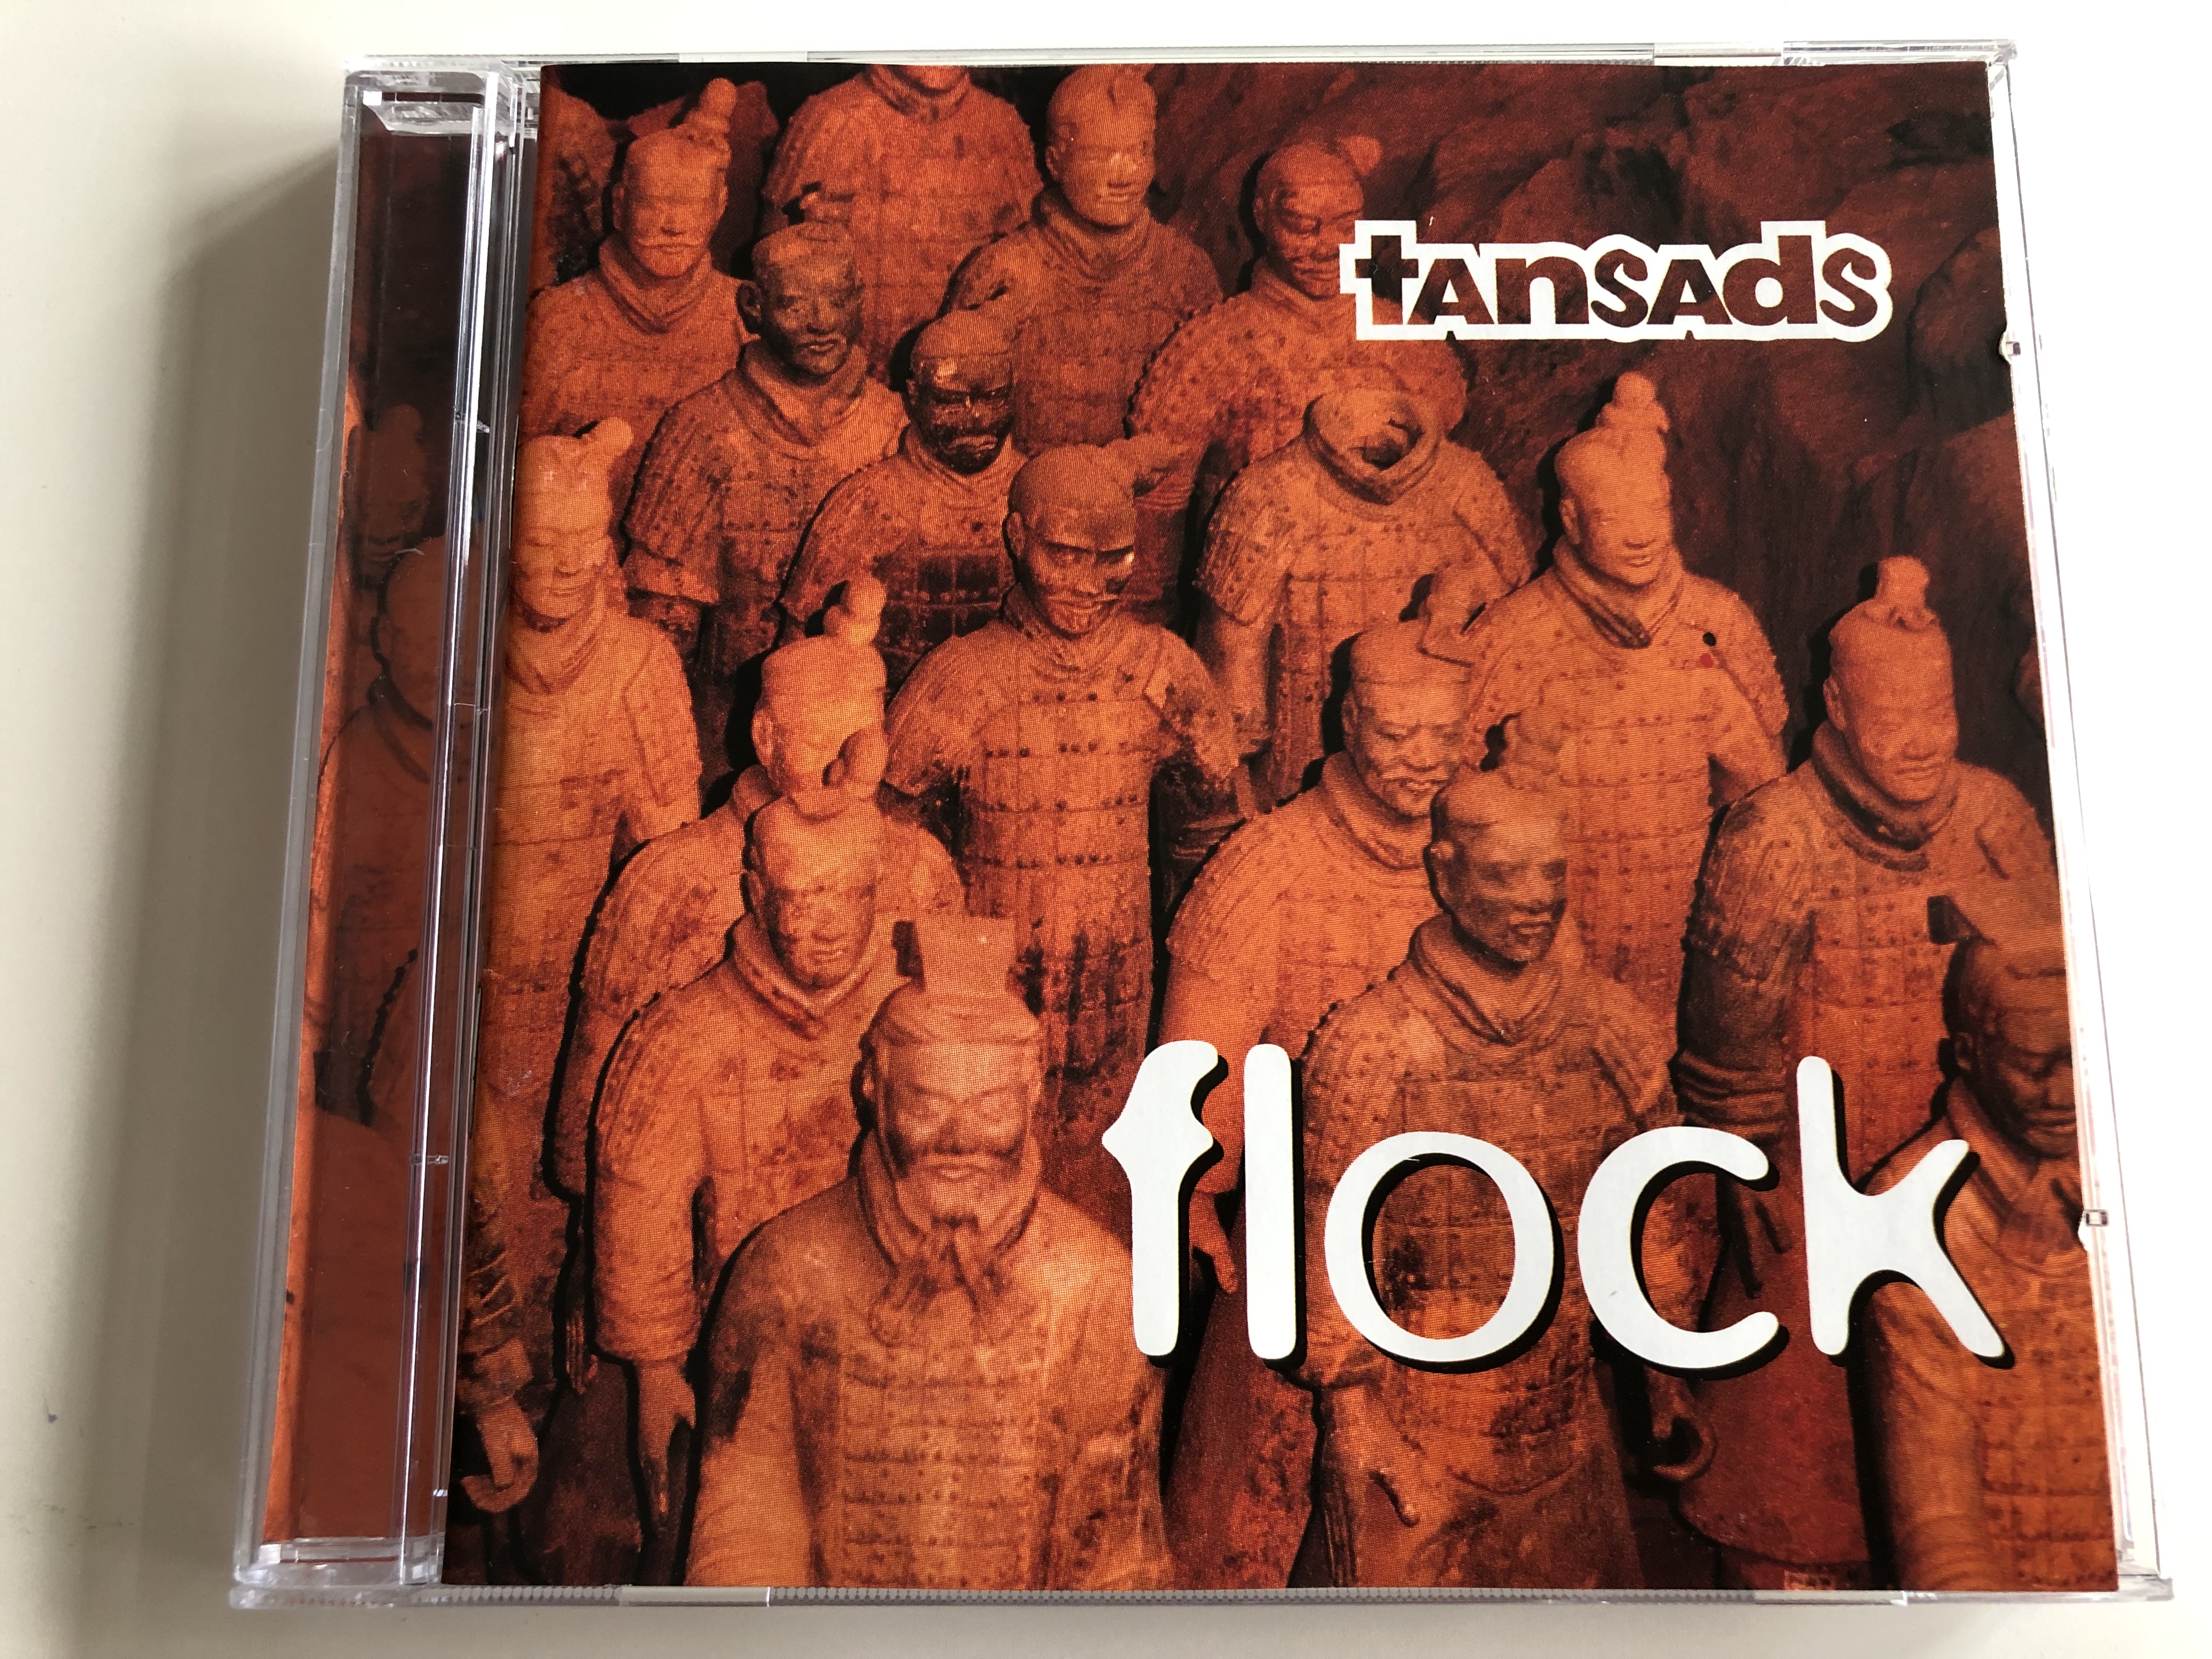 the-tansads-flock-a-band-on-the-rainbow-fear-of-falling-she-s-not-gone-iron-man-g-man-separate-souls-audio-cd-1994-tra-cd-101-1-.jpg